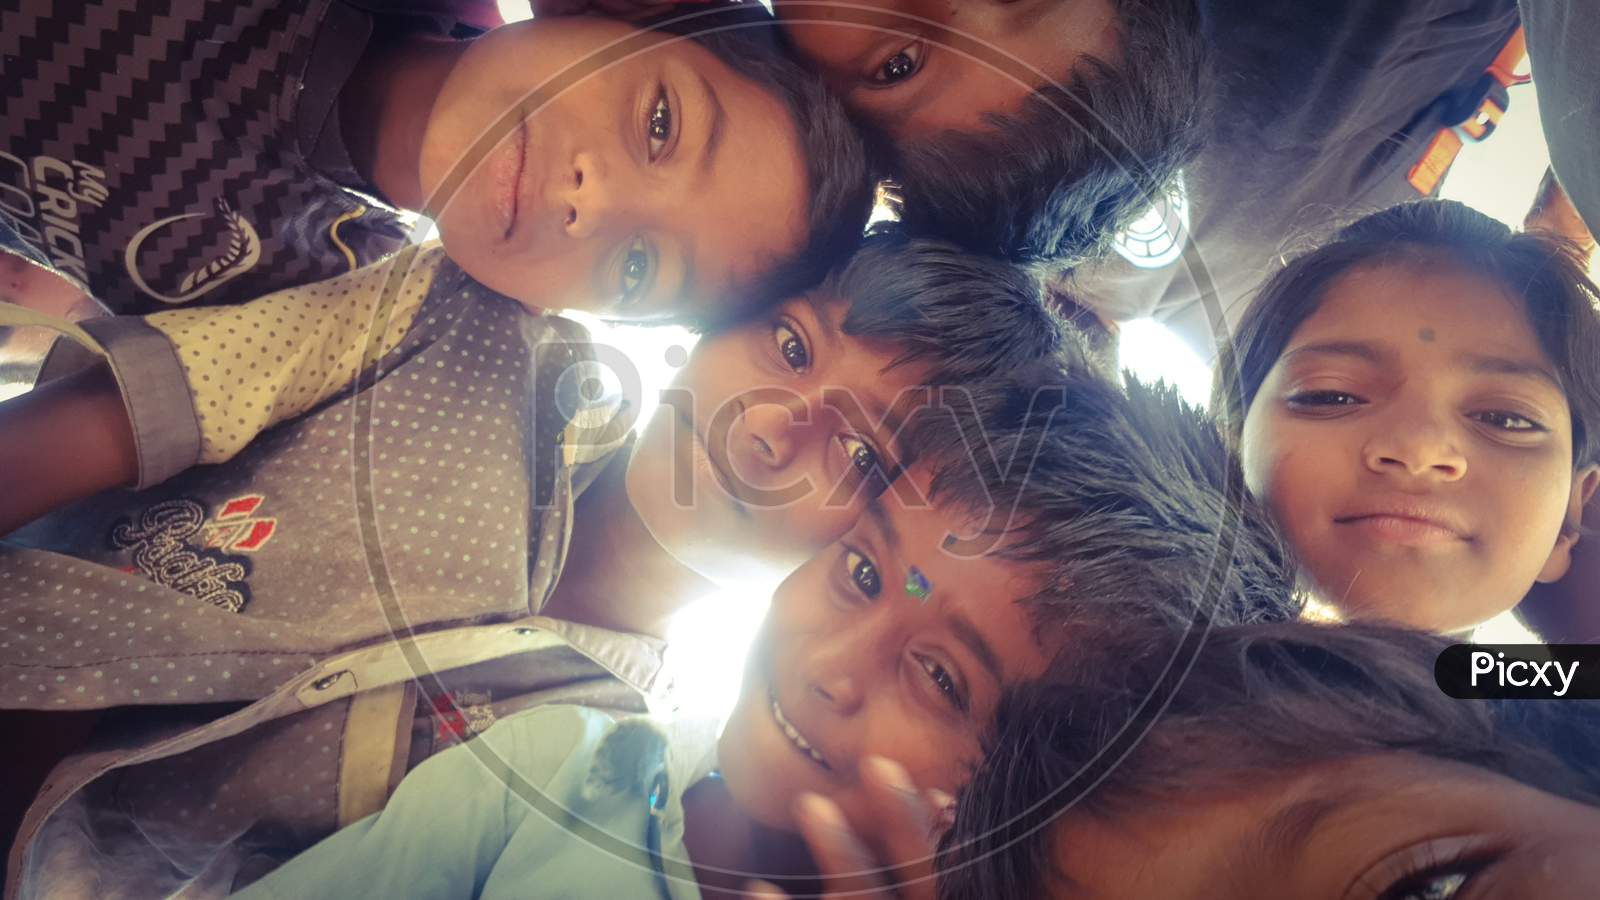 Bengaluru, Karnataka / India - August 02 2019: A group of small children huddled up and looking into the camera